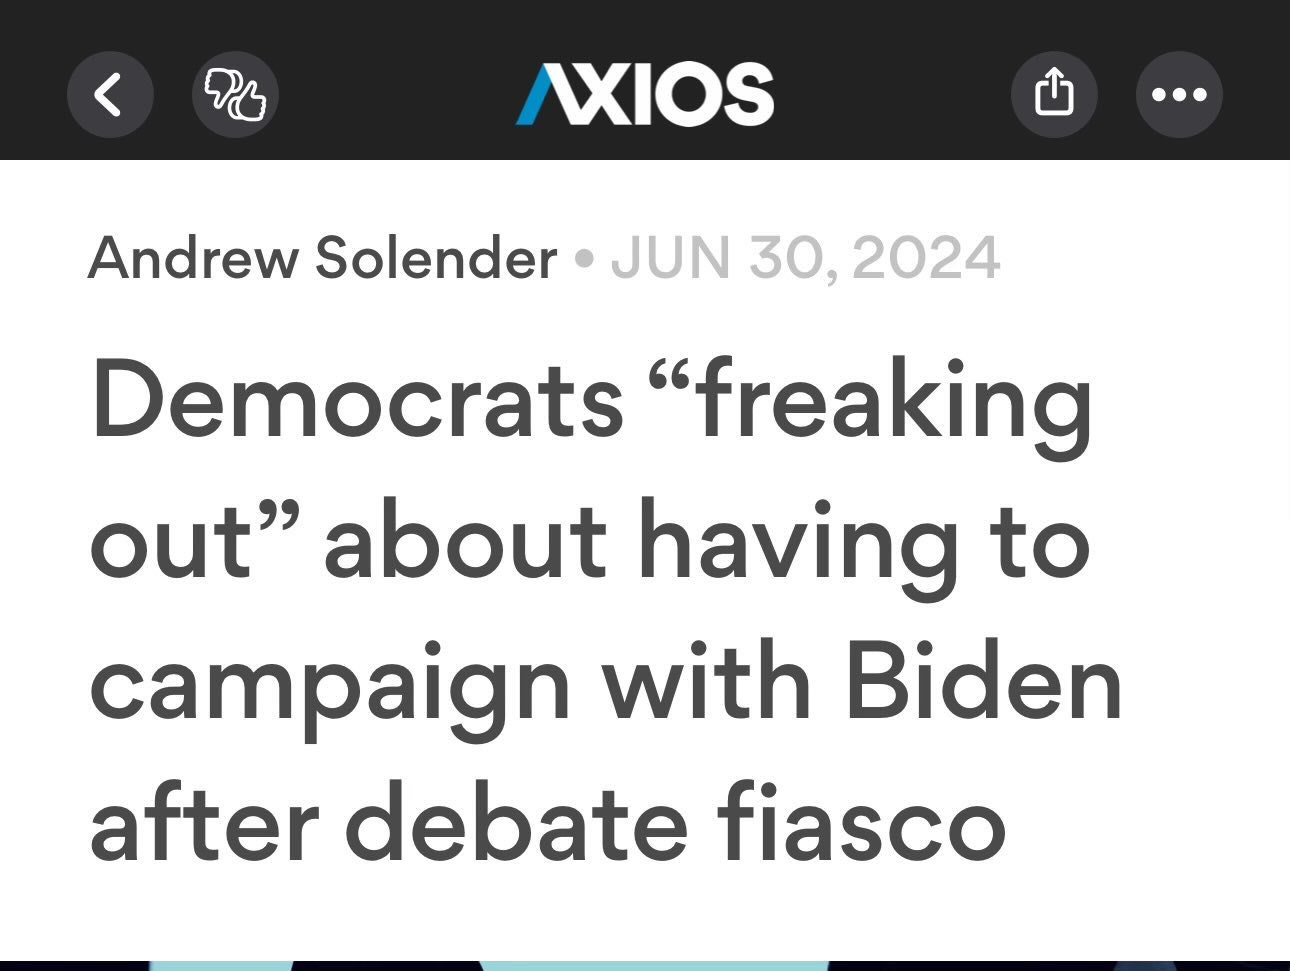 AXIOS Article:

“Democrats ‘freaking out’ about having to campaign with Biden after debate fiasco”